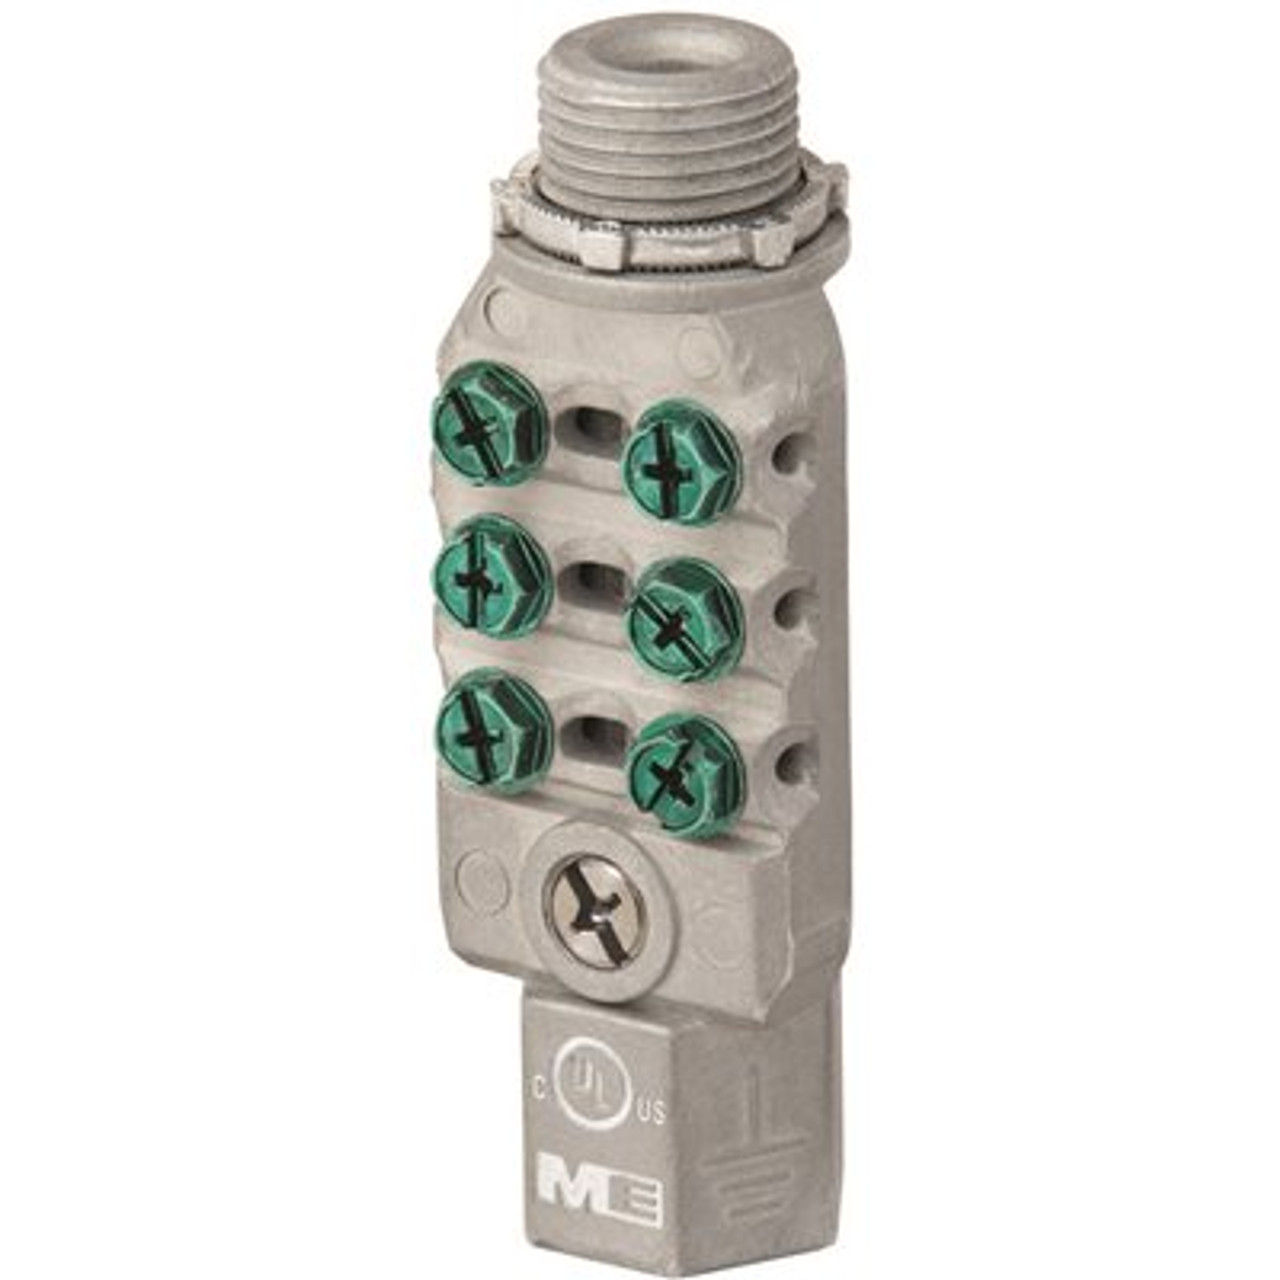 Southwire 1/2 in. Inline Intersystem Bonding Bridge Connector